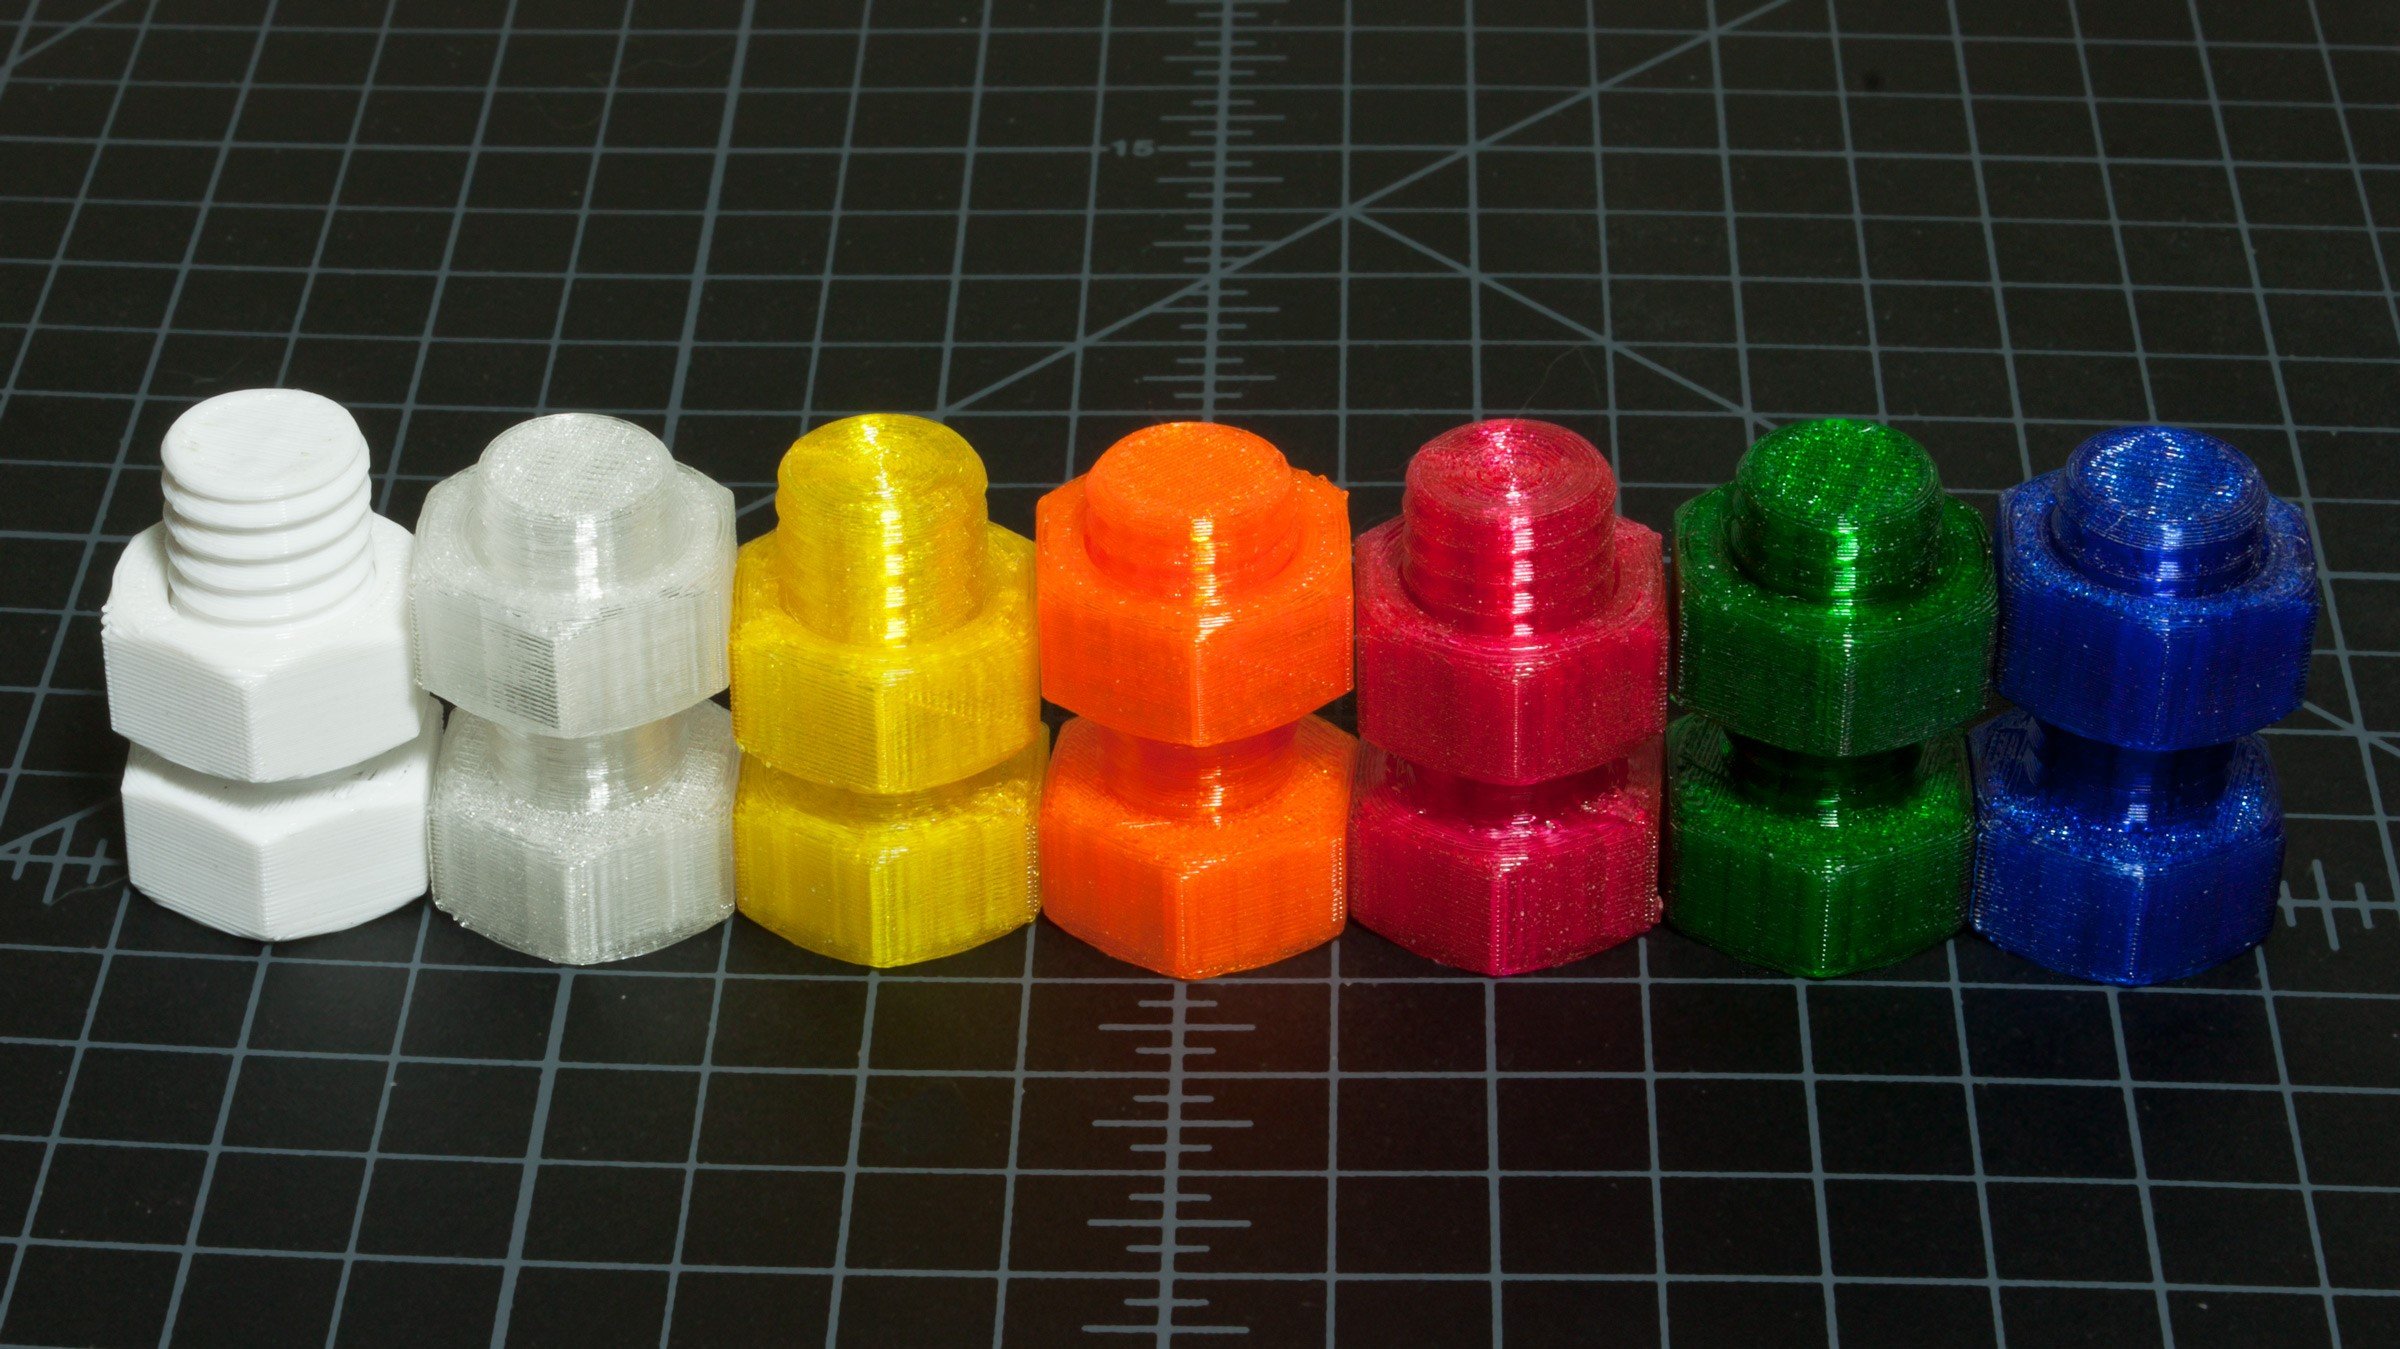 3D Printing with PETG: How to 3D Print PETG